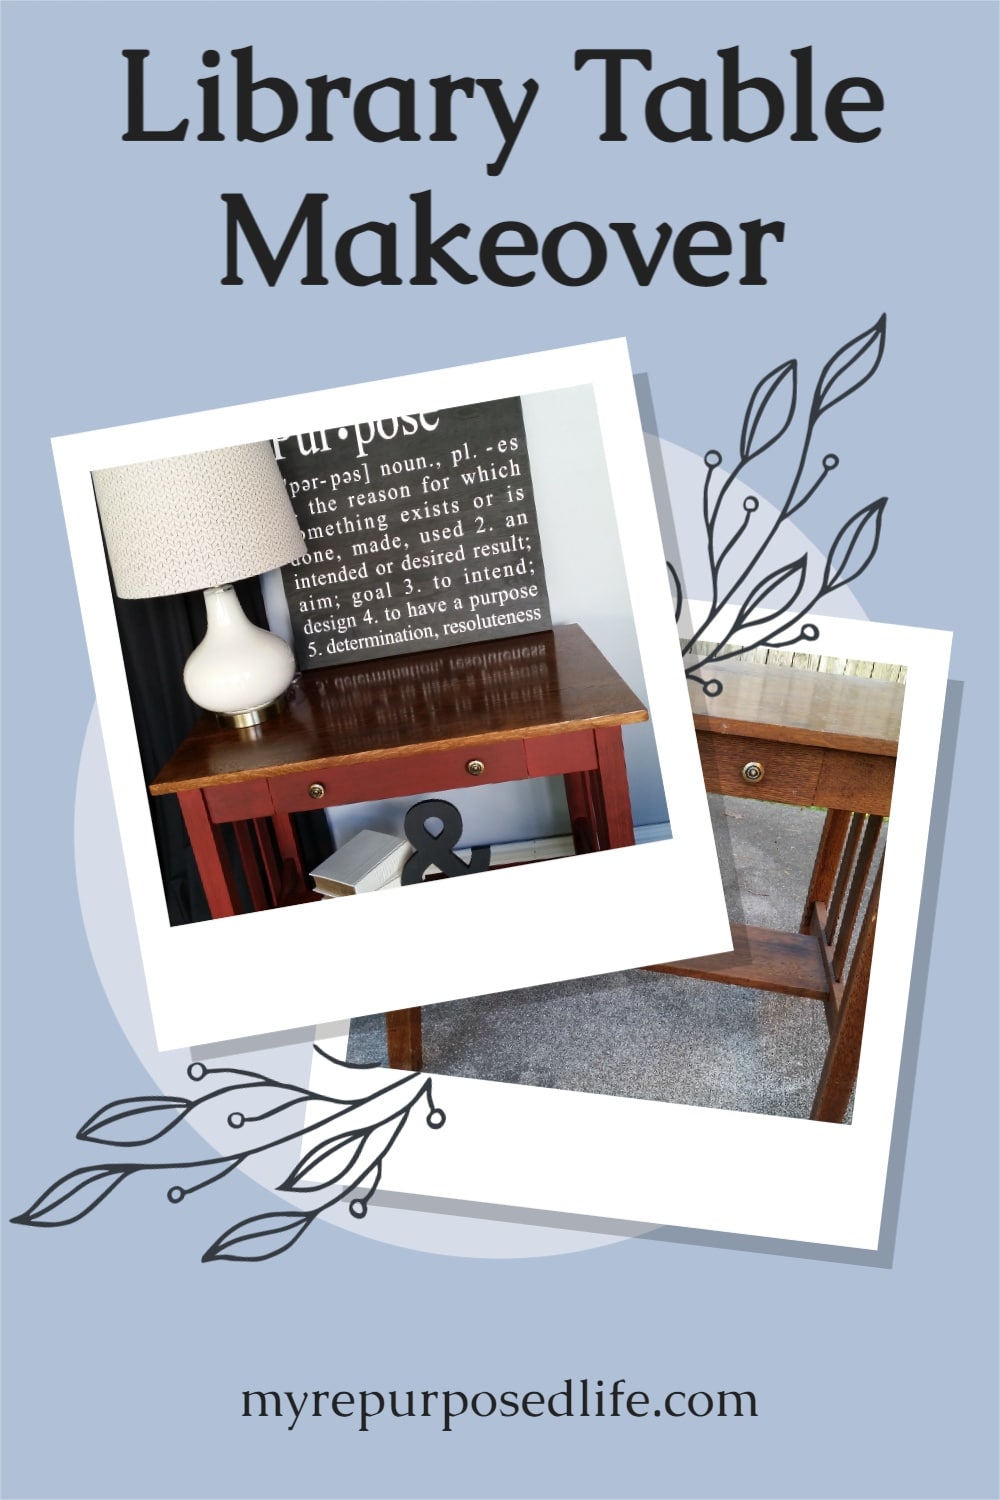 An old library table gets a new lease on life with paint, wax and stain. You will find this step by step tutorial easy to follow to update your own furniture. #MyRepurposedLife #repurposed #upcycled #furniture #DIY #librarytable via @repurposedlife